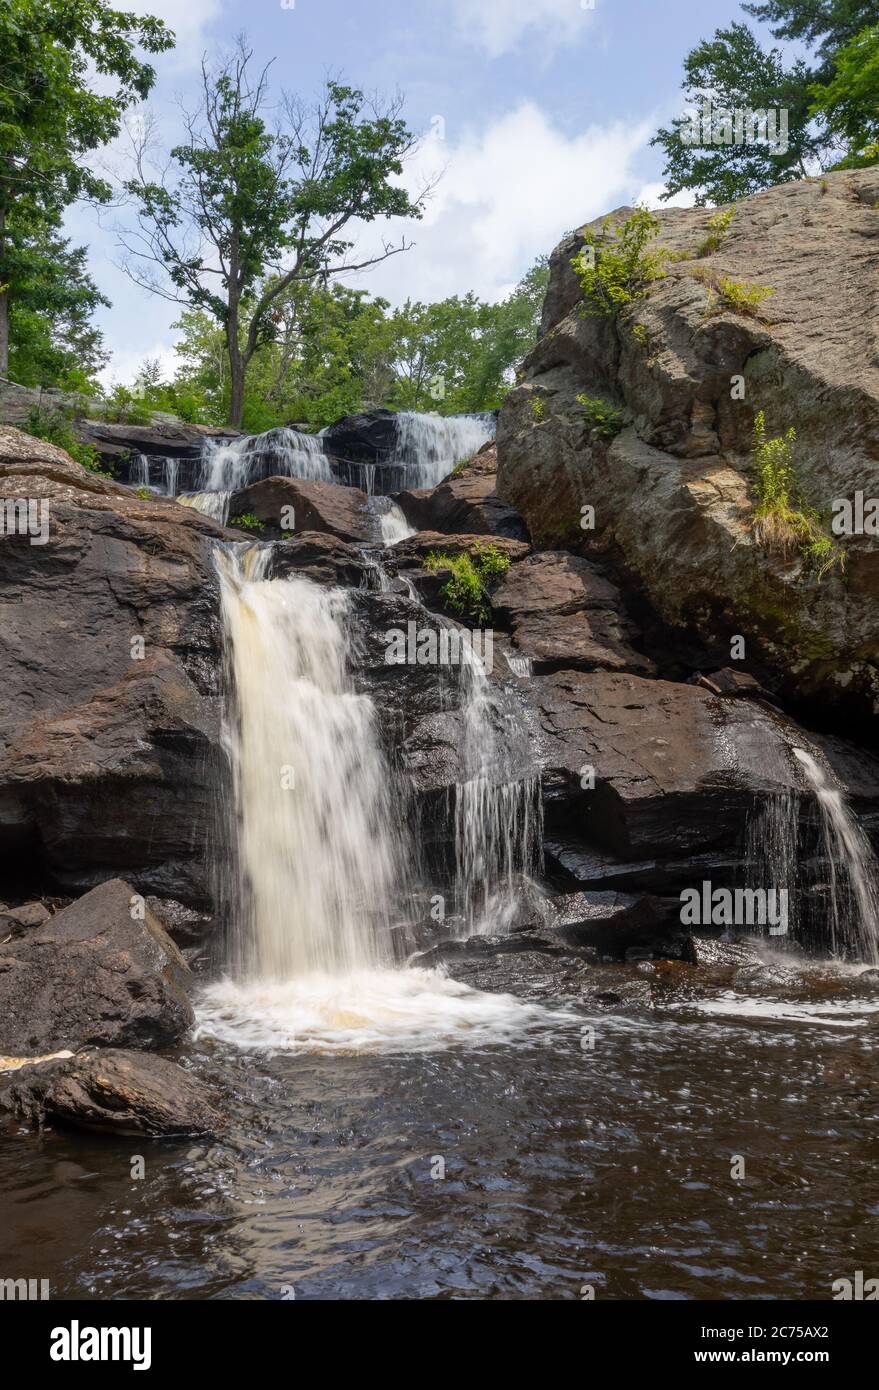 Landscape with waterfall, rocks and leafy green trees at Eightmile River,Chapman Falls, East Haddam, Connecticut Devil`s Hopyard State Park Stock Photo